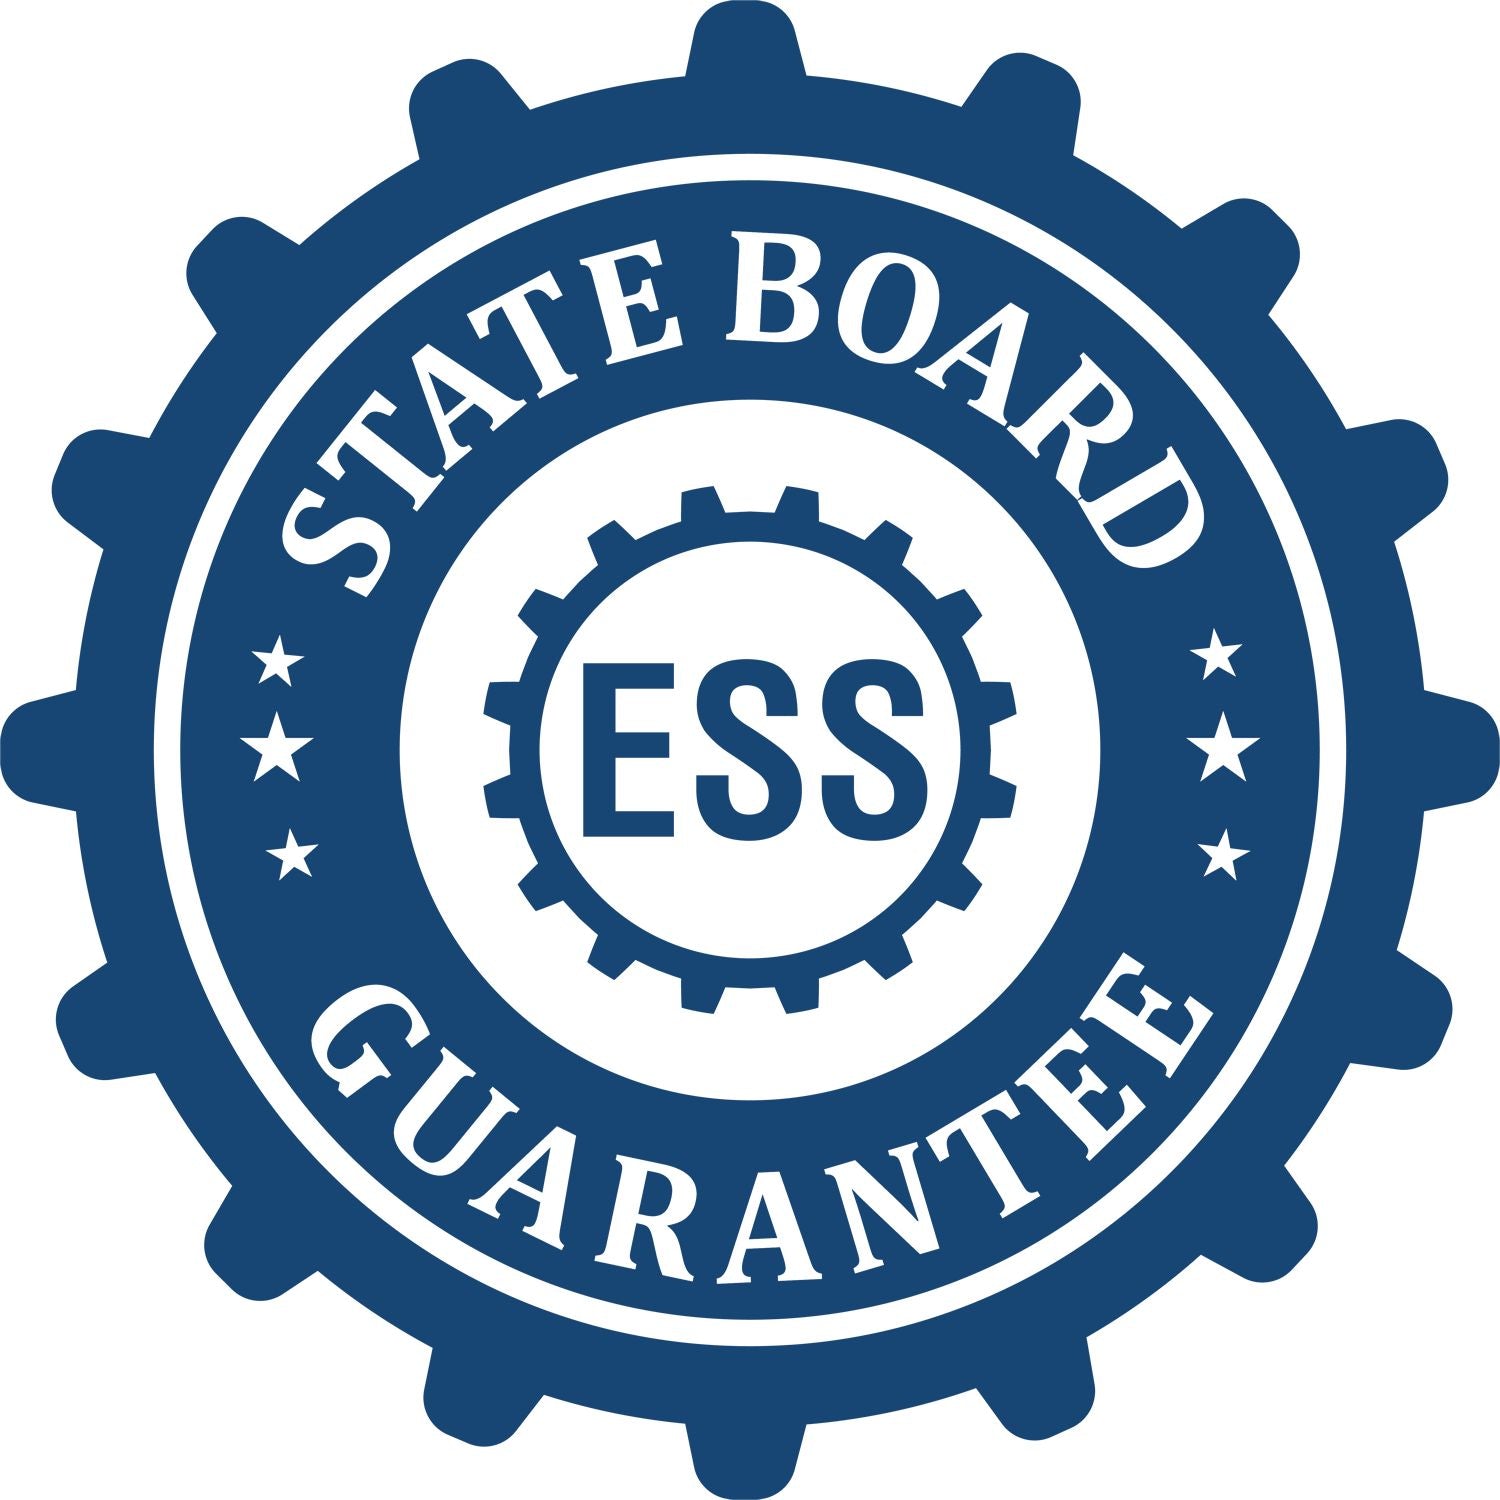 An emblem in a gear shape illustrating a state board guarantee for the Handheld Virginia Land Surveyor Seal product.